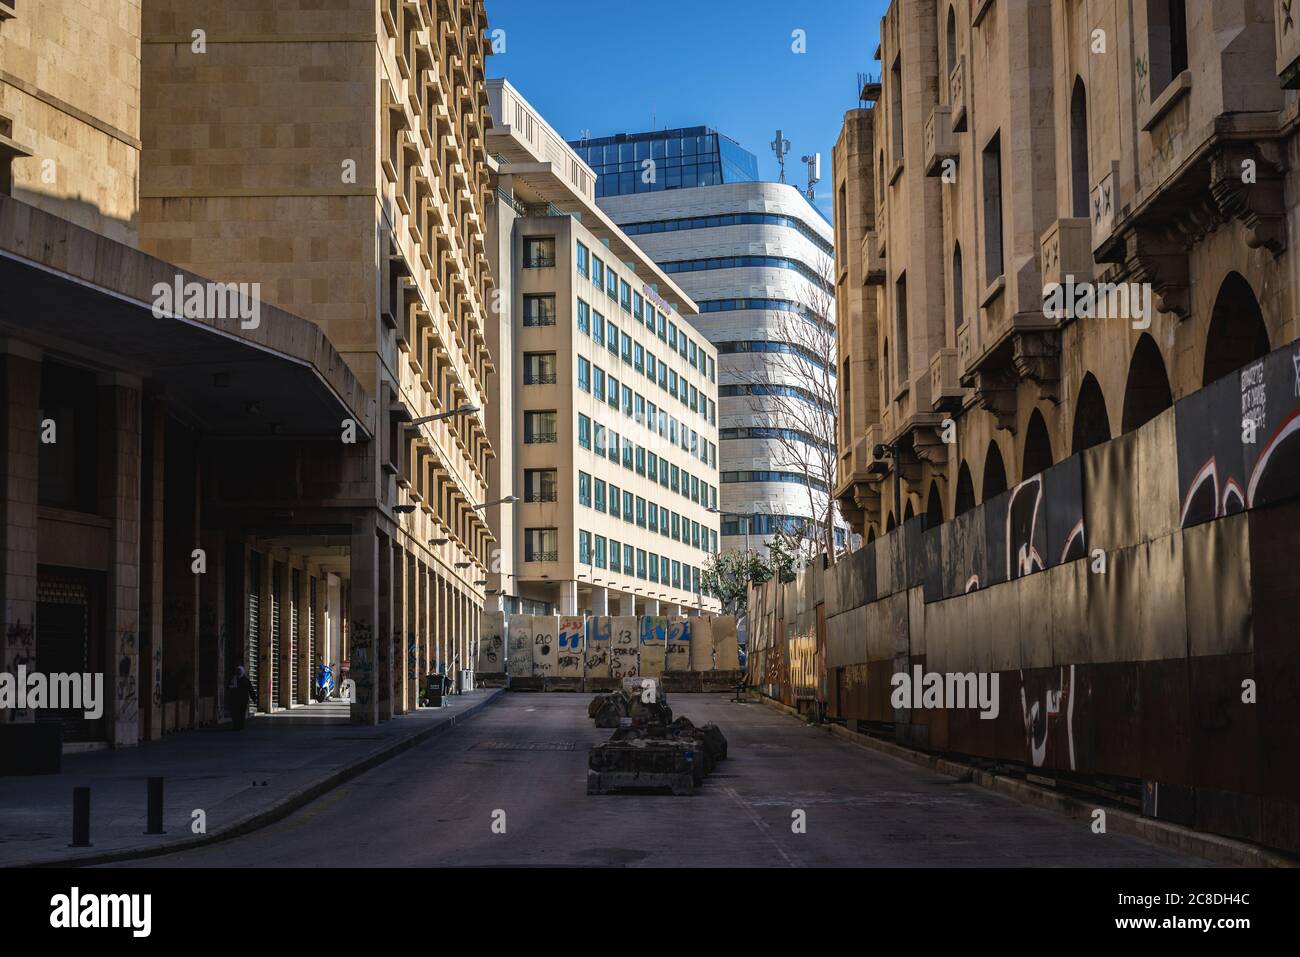 Street barricades on Syria Street left after October Revolution - 2019-2020 protests in Beirut, Lebanon, abandoned Grand Theatre on right Stock Photo